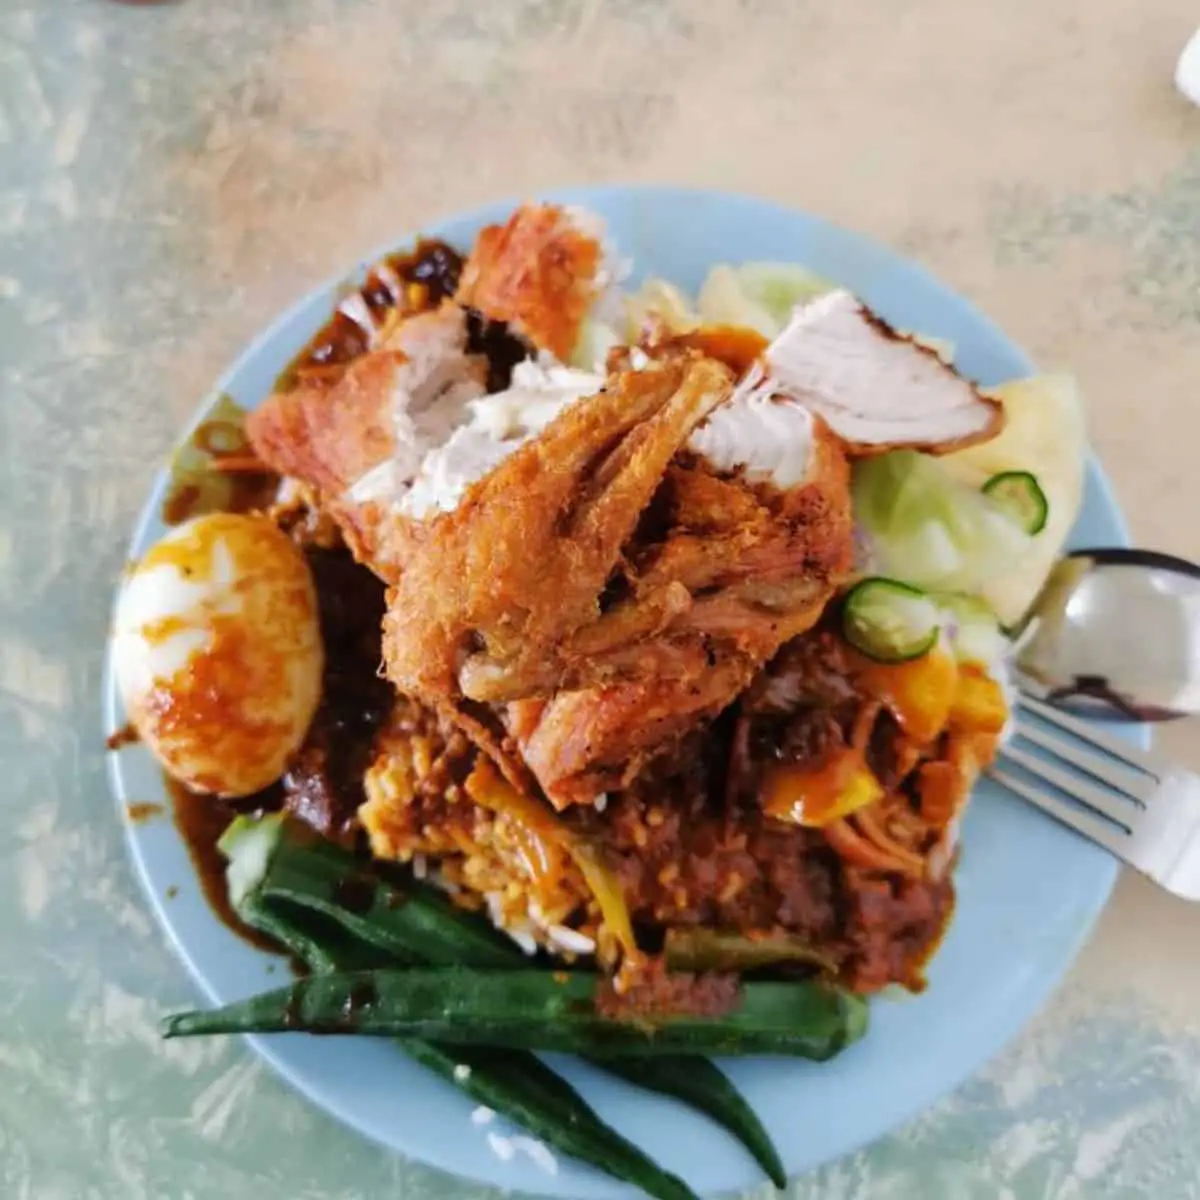 Full plate of Nasi Kandar from Merlin with chicken, okra, and boiled egg in a light blue plate